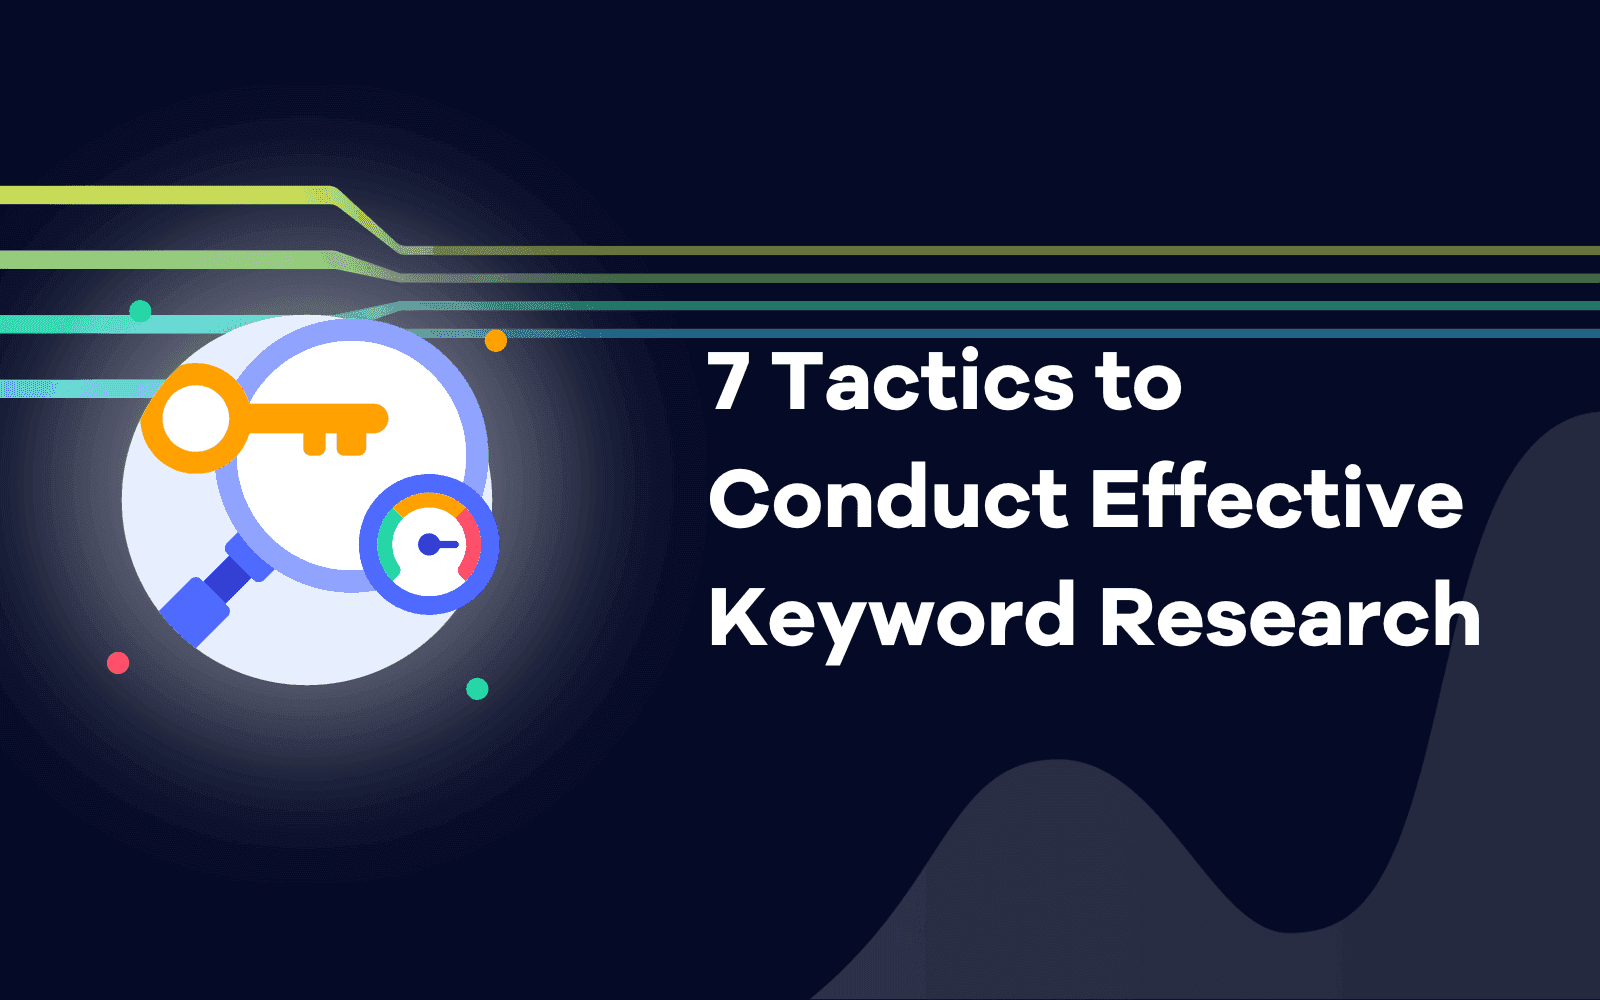 Tactics to Conduct Effective Keyword Research